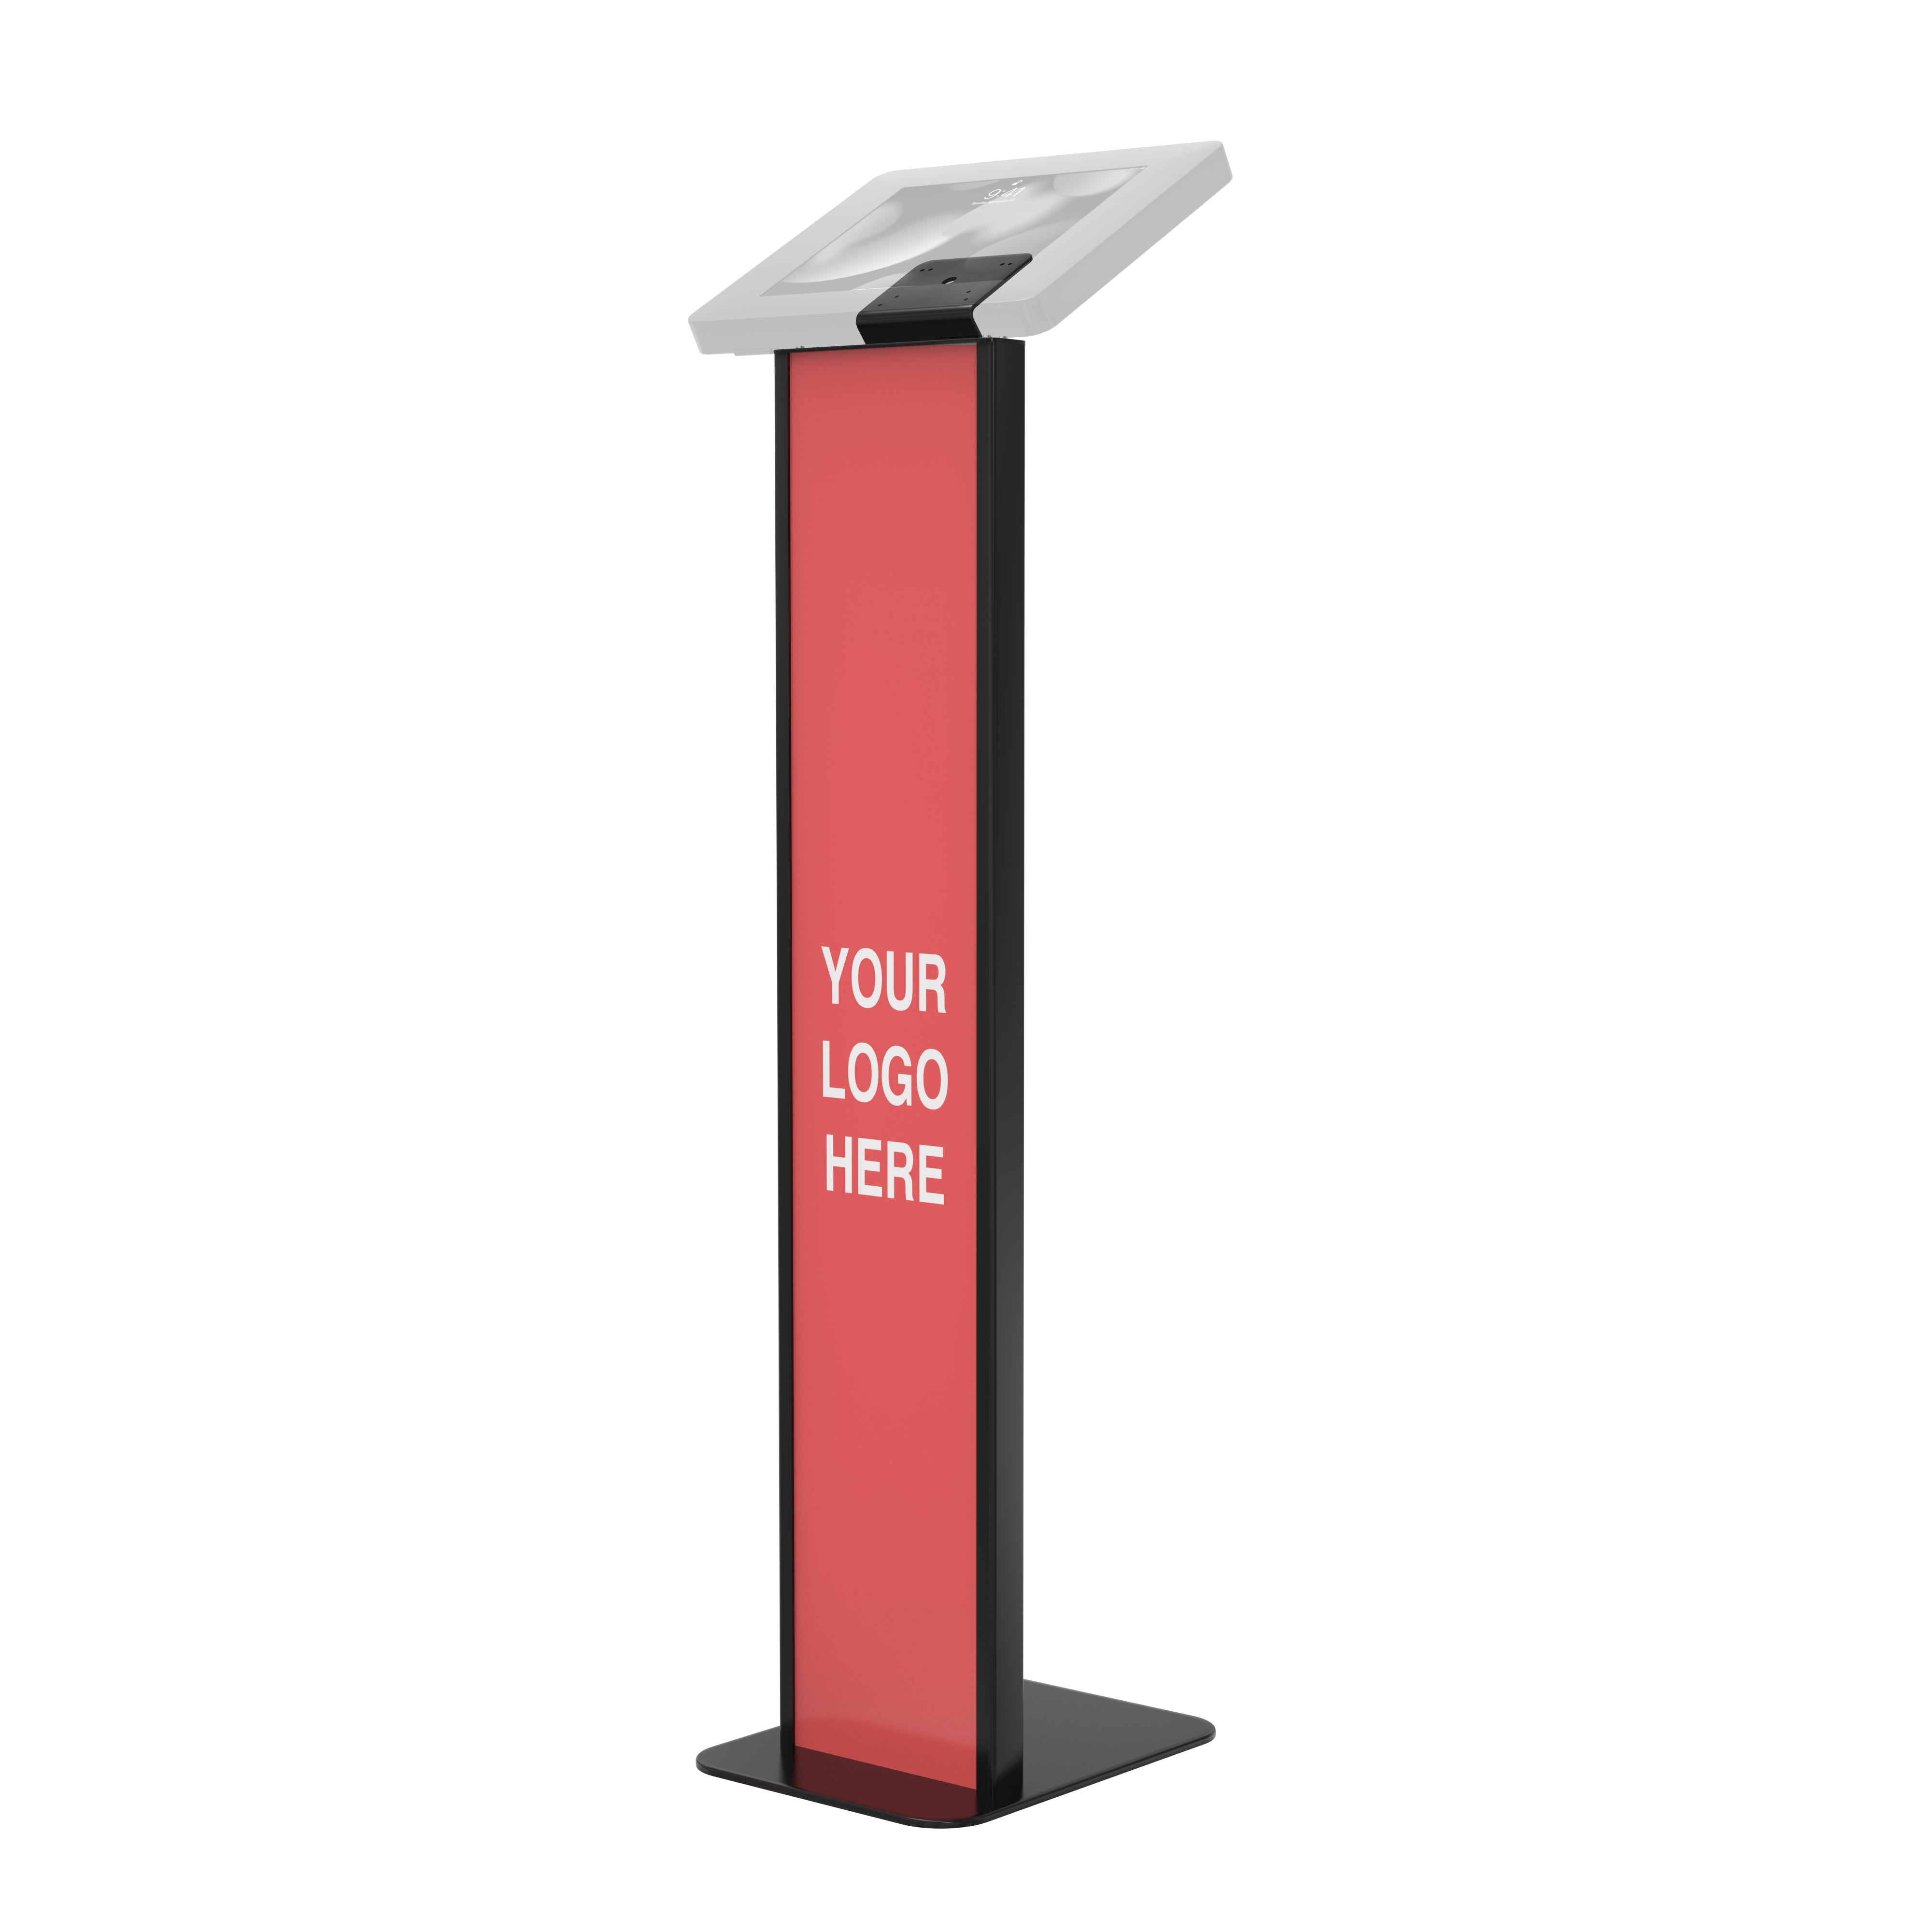 Premium Floor Stand Kiosk with Graphic Slots and VESA Plate for Kitting (Black)